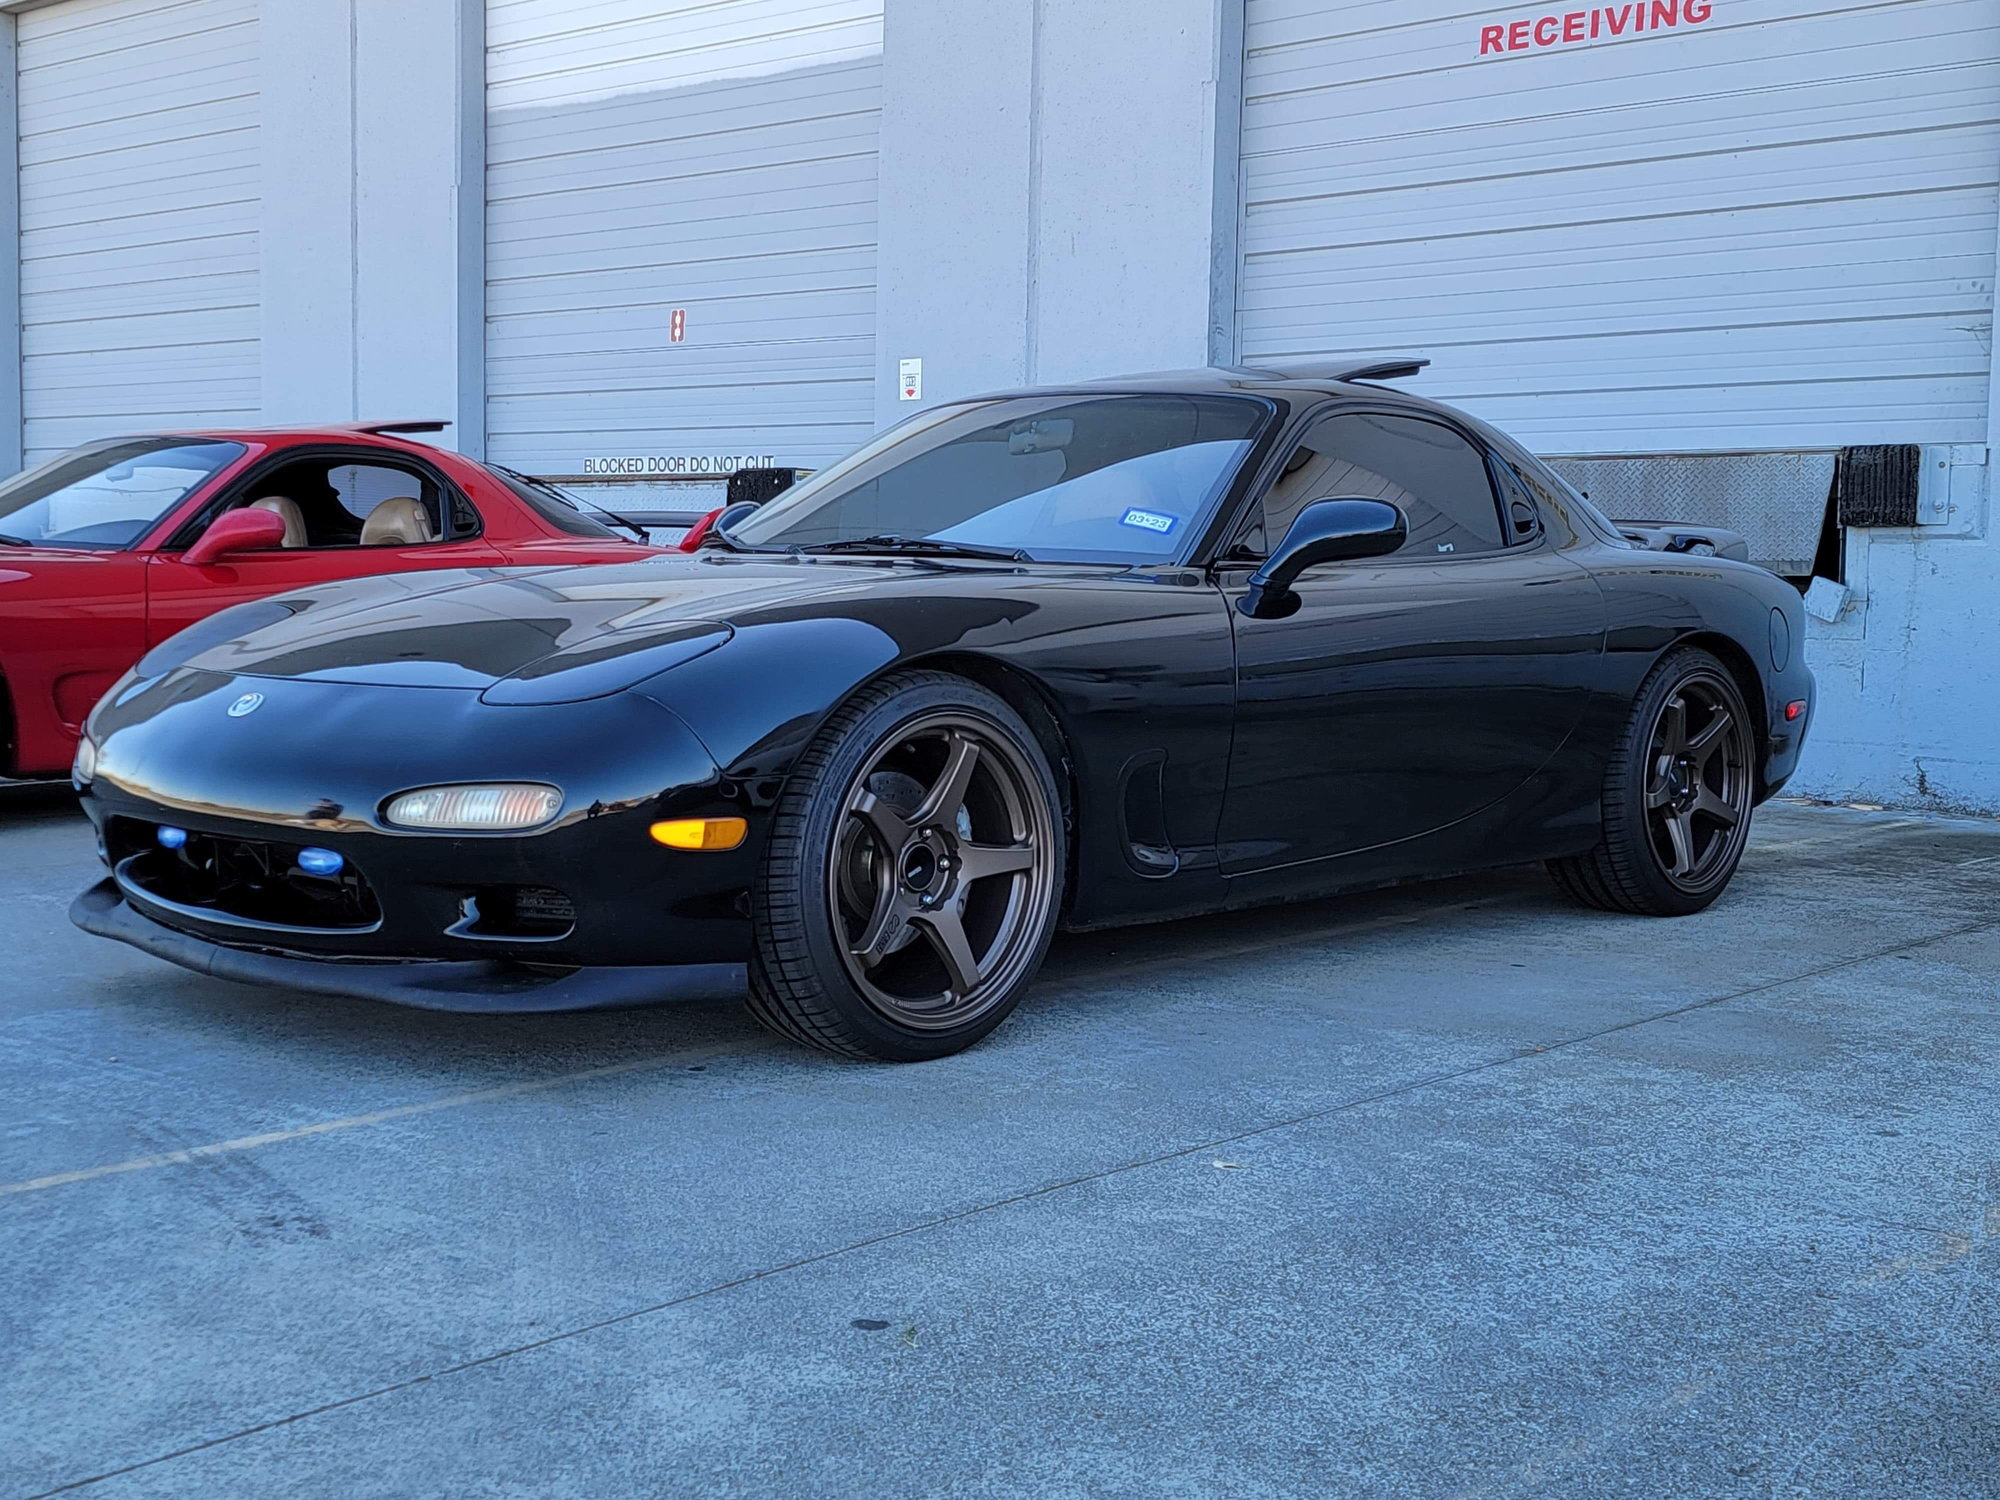 1995 Mazda RX-7 - 1995 FD RX-7 for sale - Used - VIN JM1FD3334S0400278 - 156,000 Miles - 2WD - Manual - Coupe - Black - Vacaville, CA 95688, United States